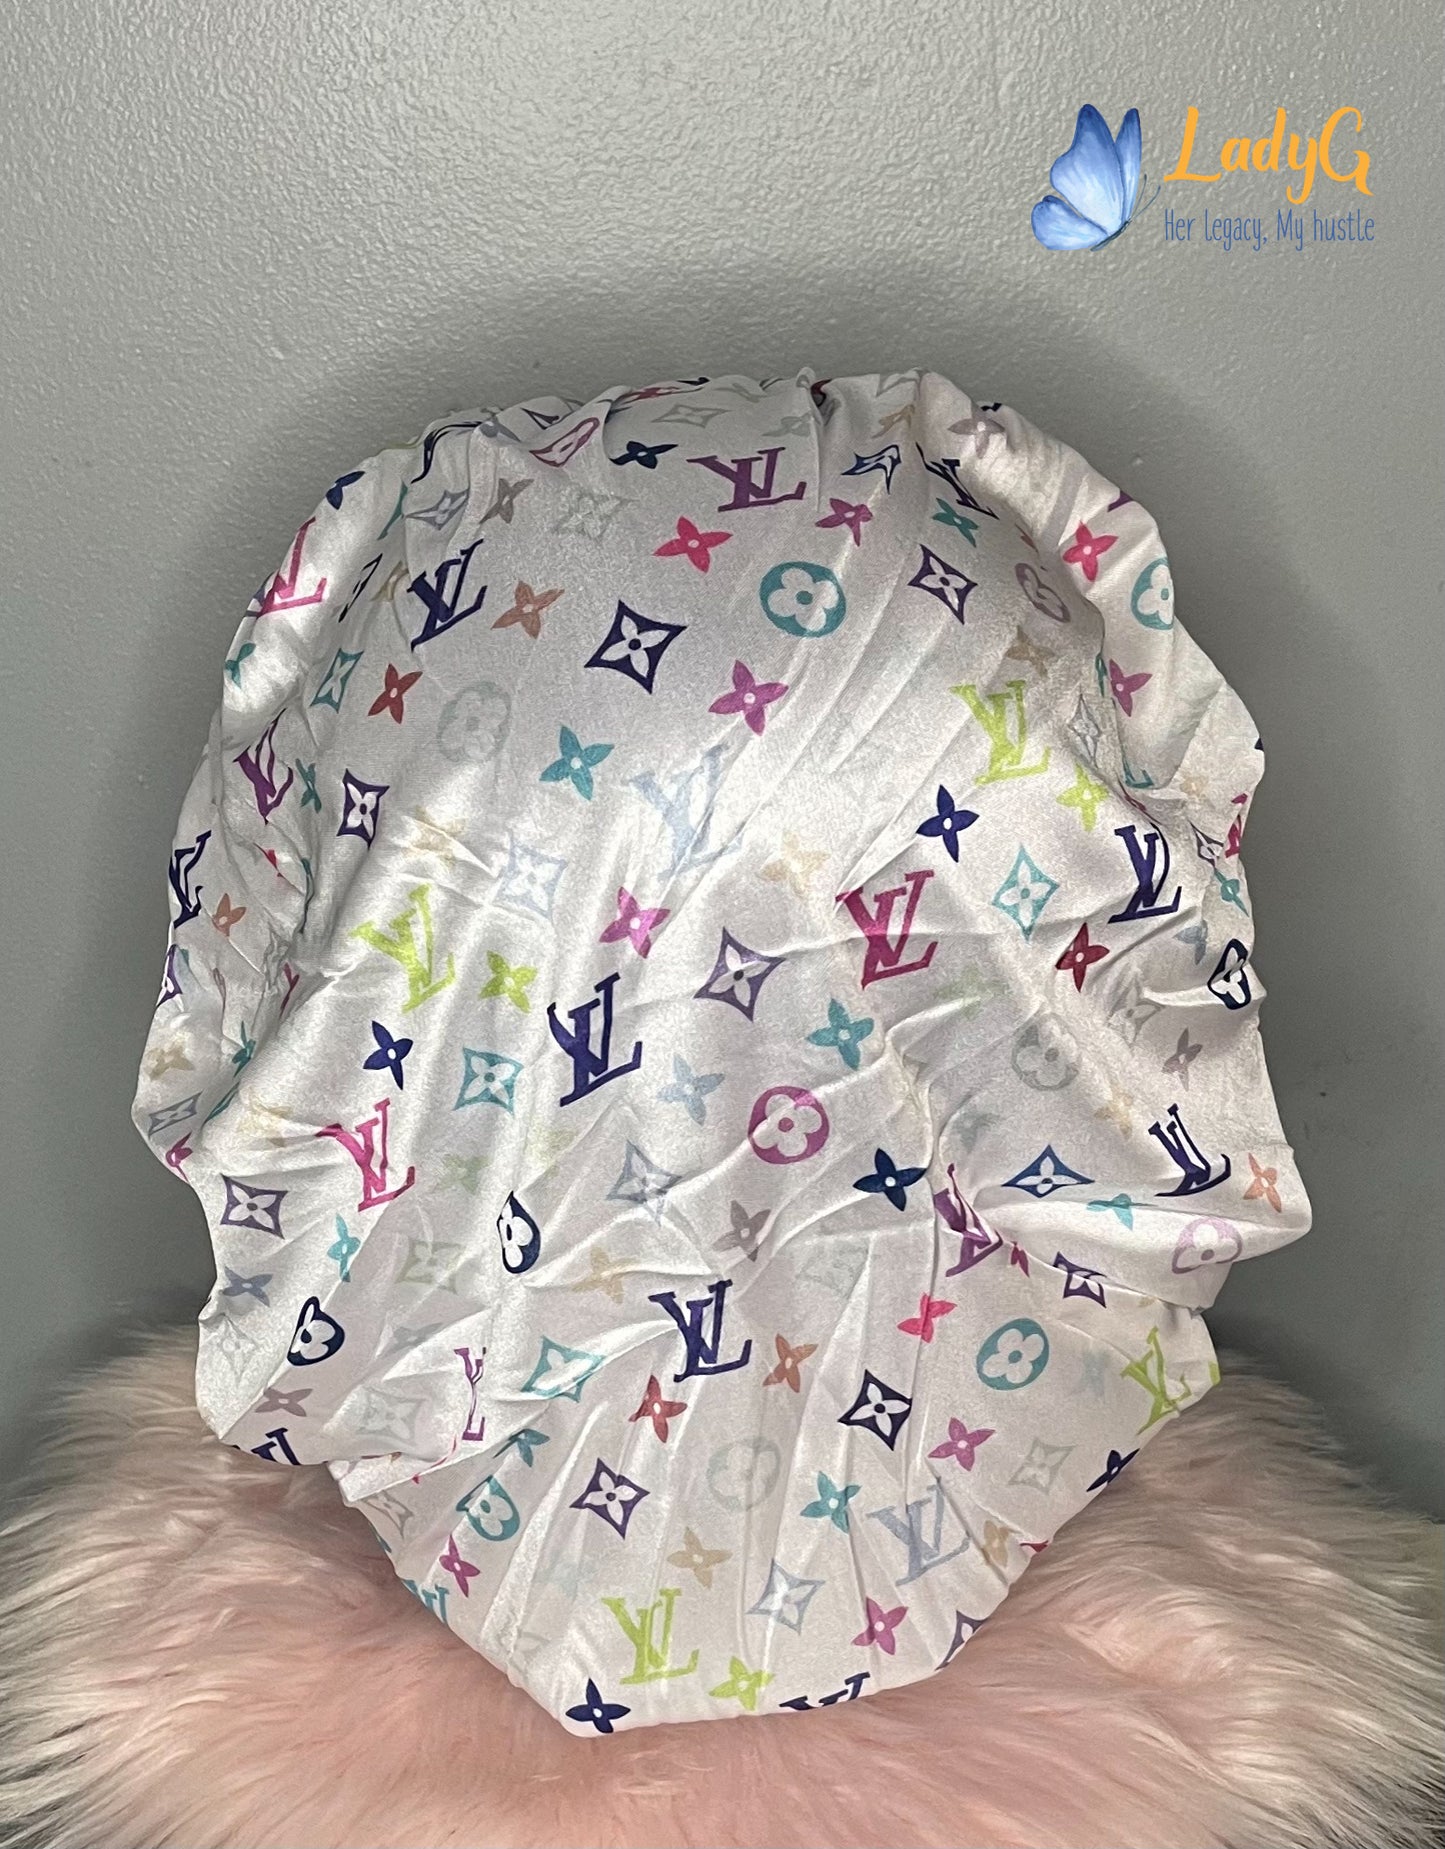 Vuitton & Other Luxury Designer Inspired Hair Bonnets – J. Nicole Extensions